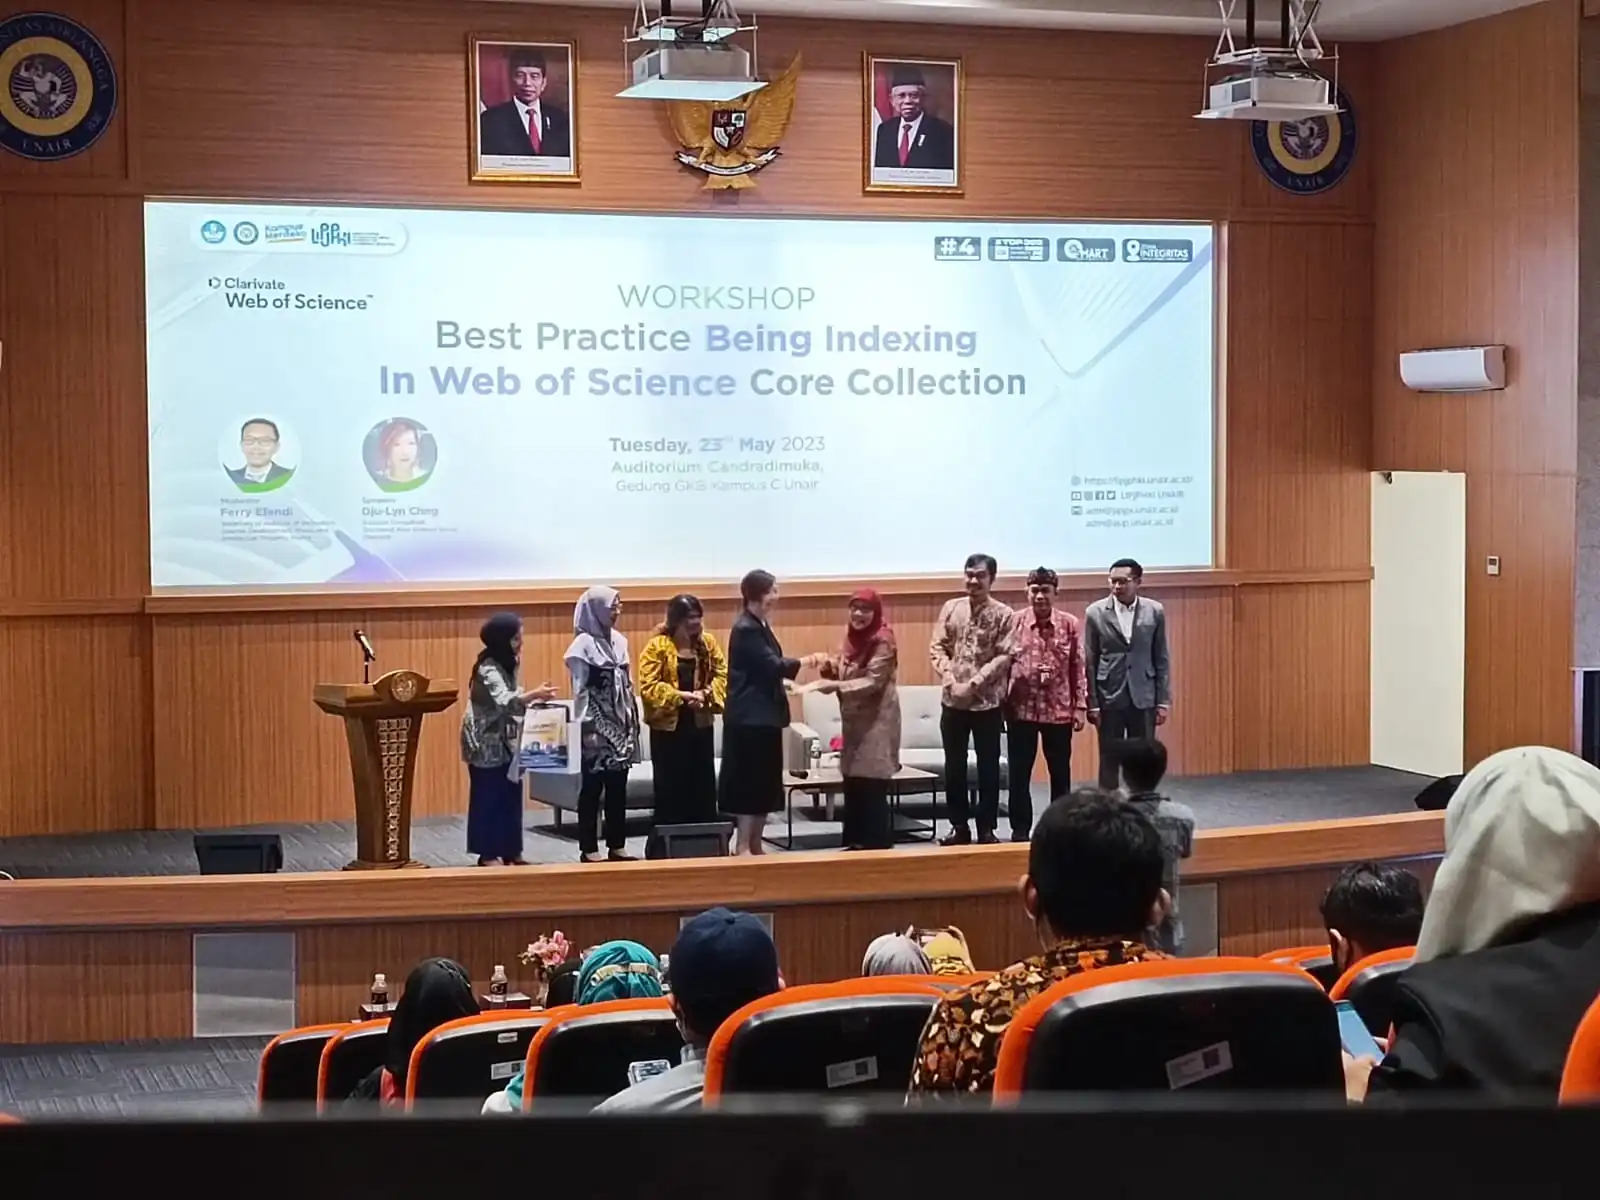 Workshop: Best Practice Being Indexing in Web of Science Core Collection